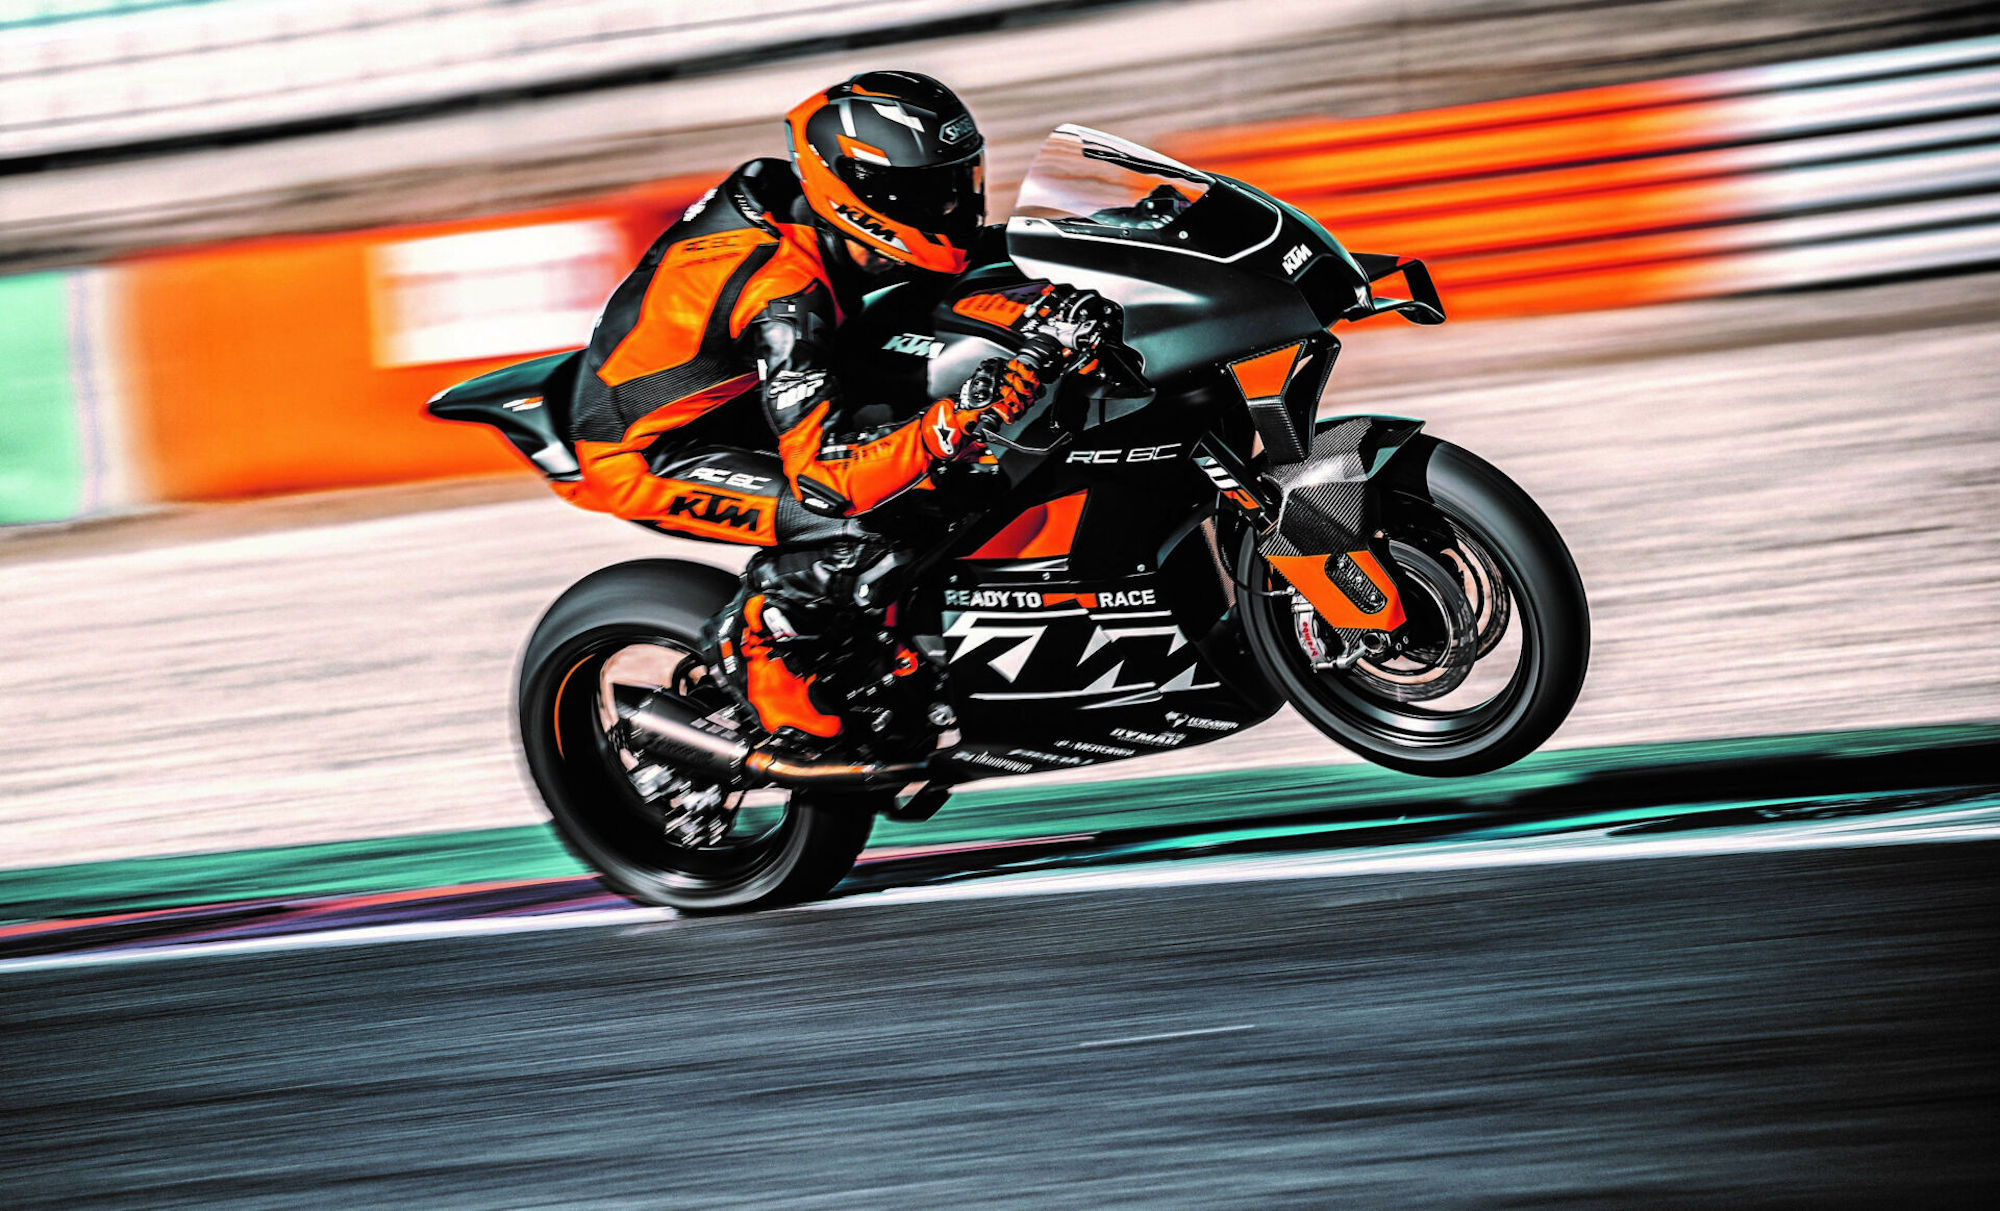 KTM's all-new 2023 RC 8C. Media sourced from KTM.